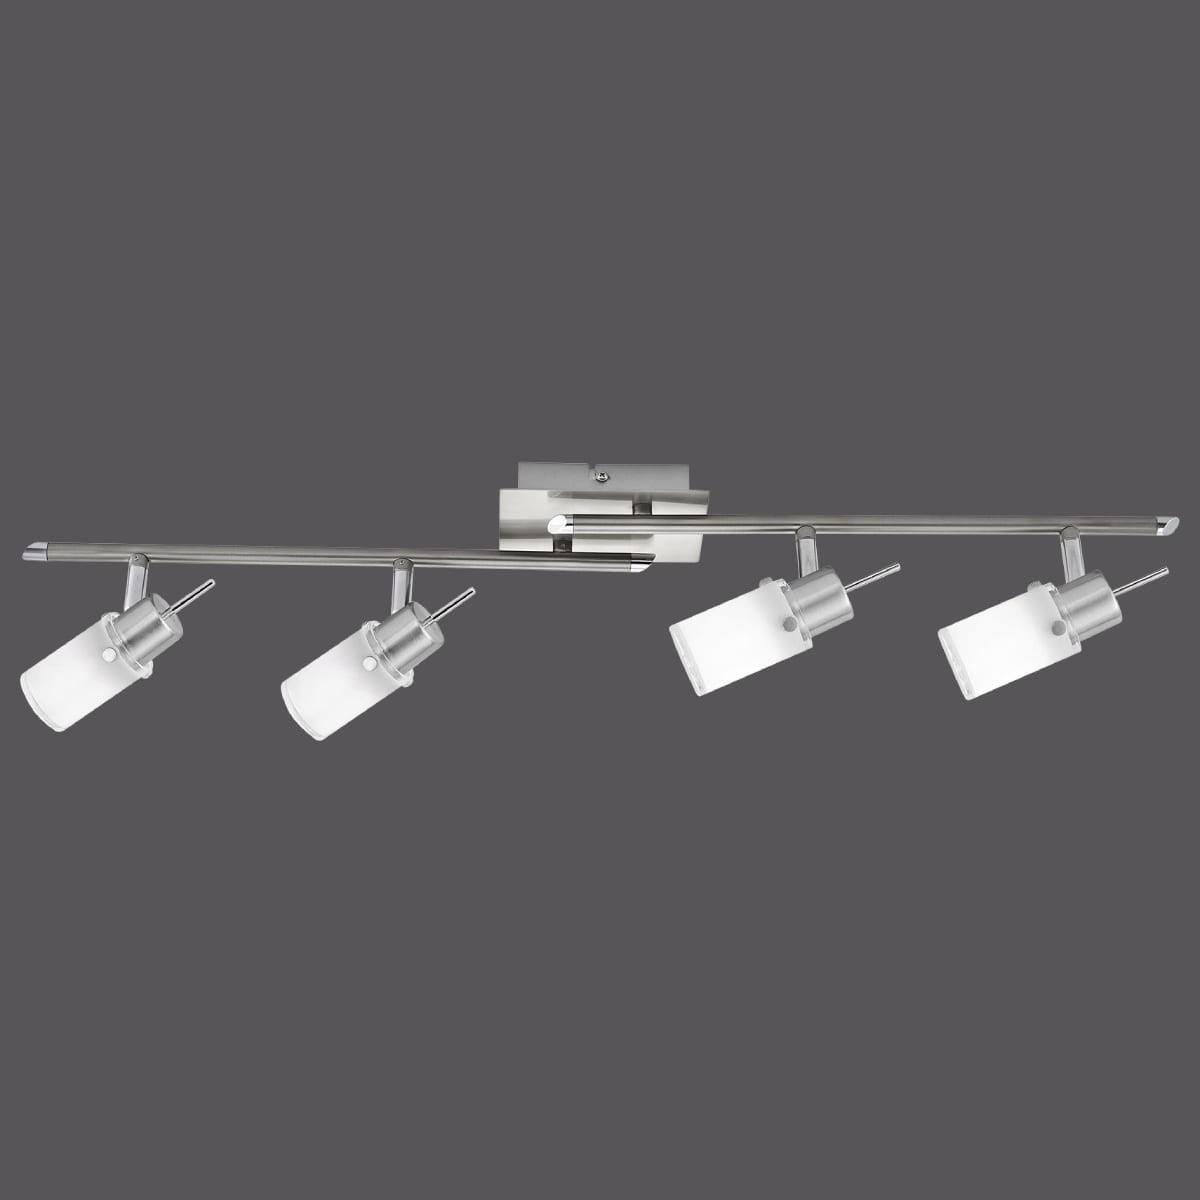 LED ceiling light in steel with 4 adjustable light heads and warm white light color shines glare-free - Peter Murphy Lighting & Electrical Ltd